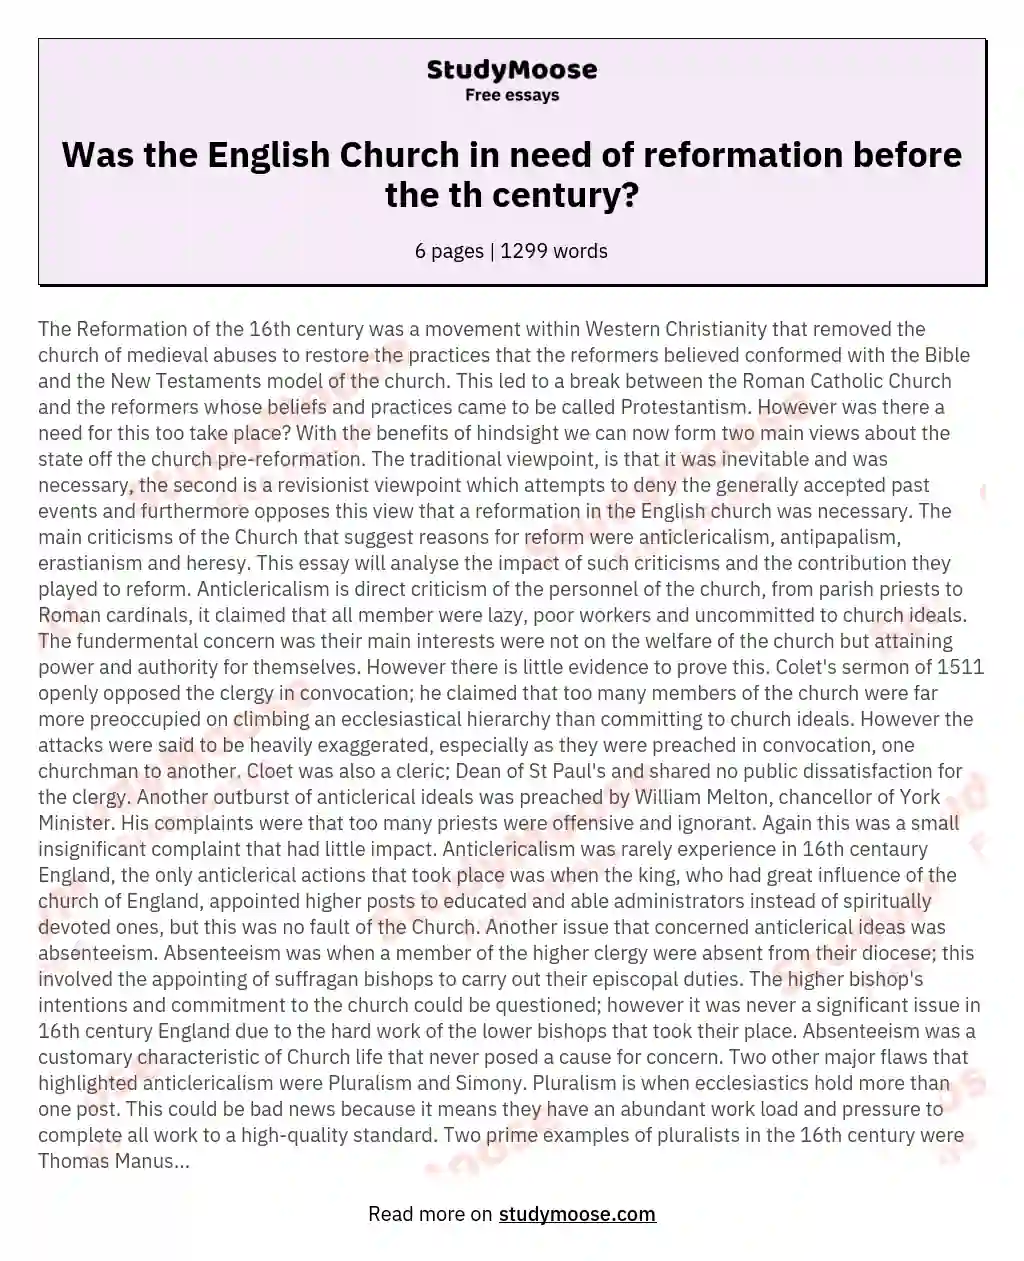 Was the English Church in need of reformation before the th century? essay